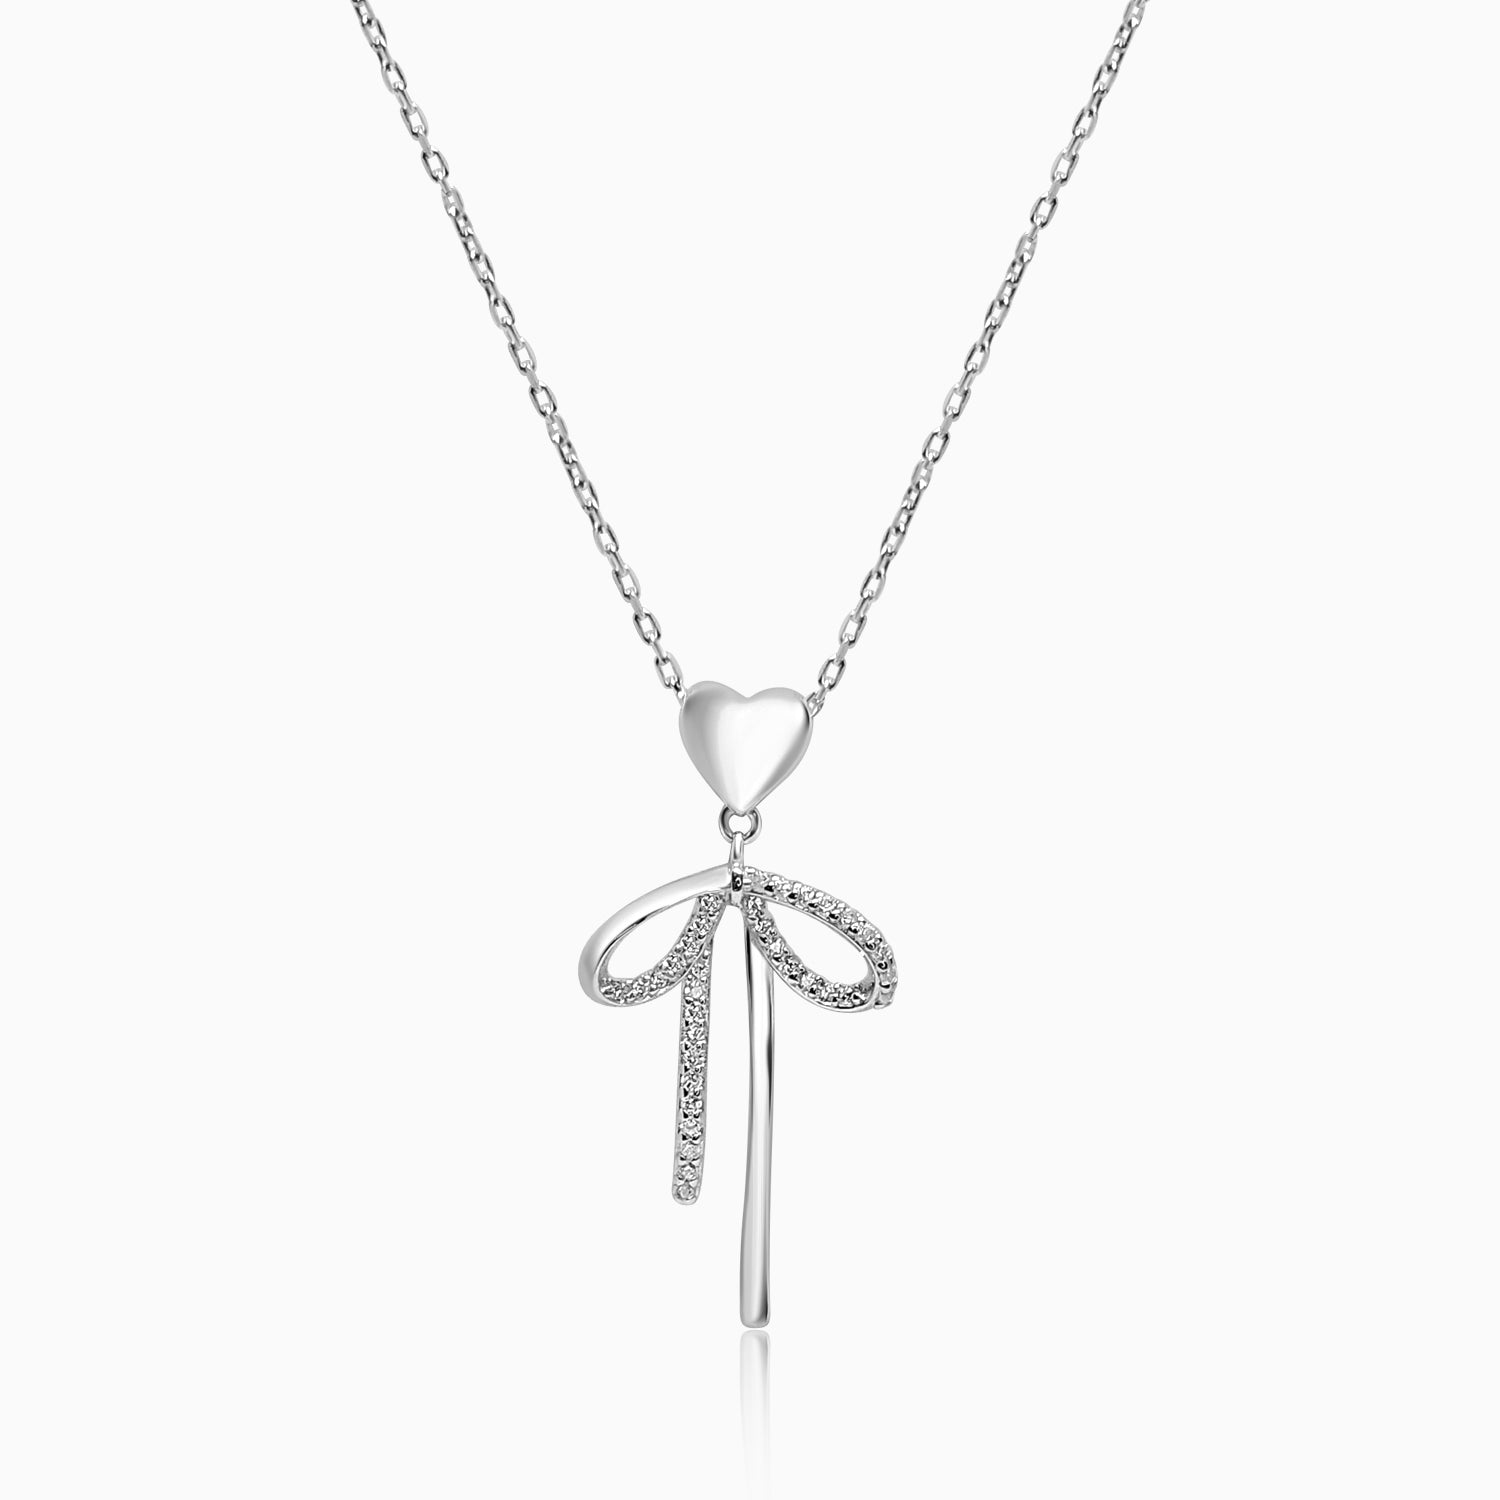 Silver Sparkling Long Bow Necklace